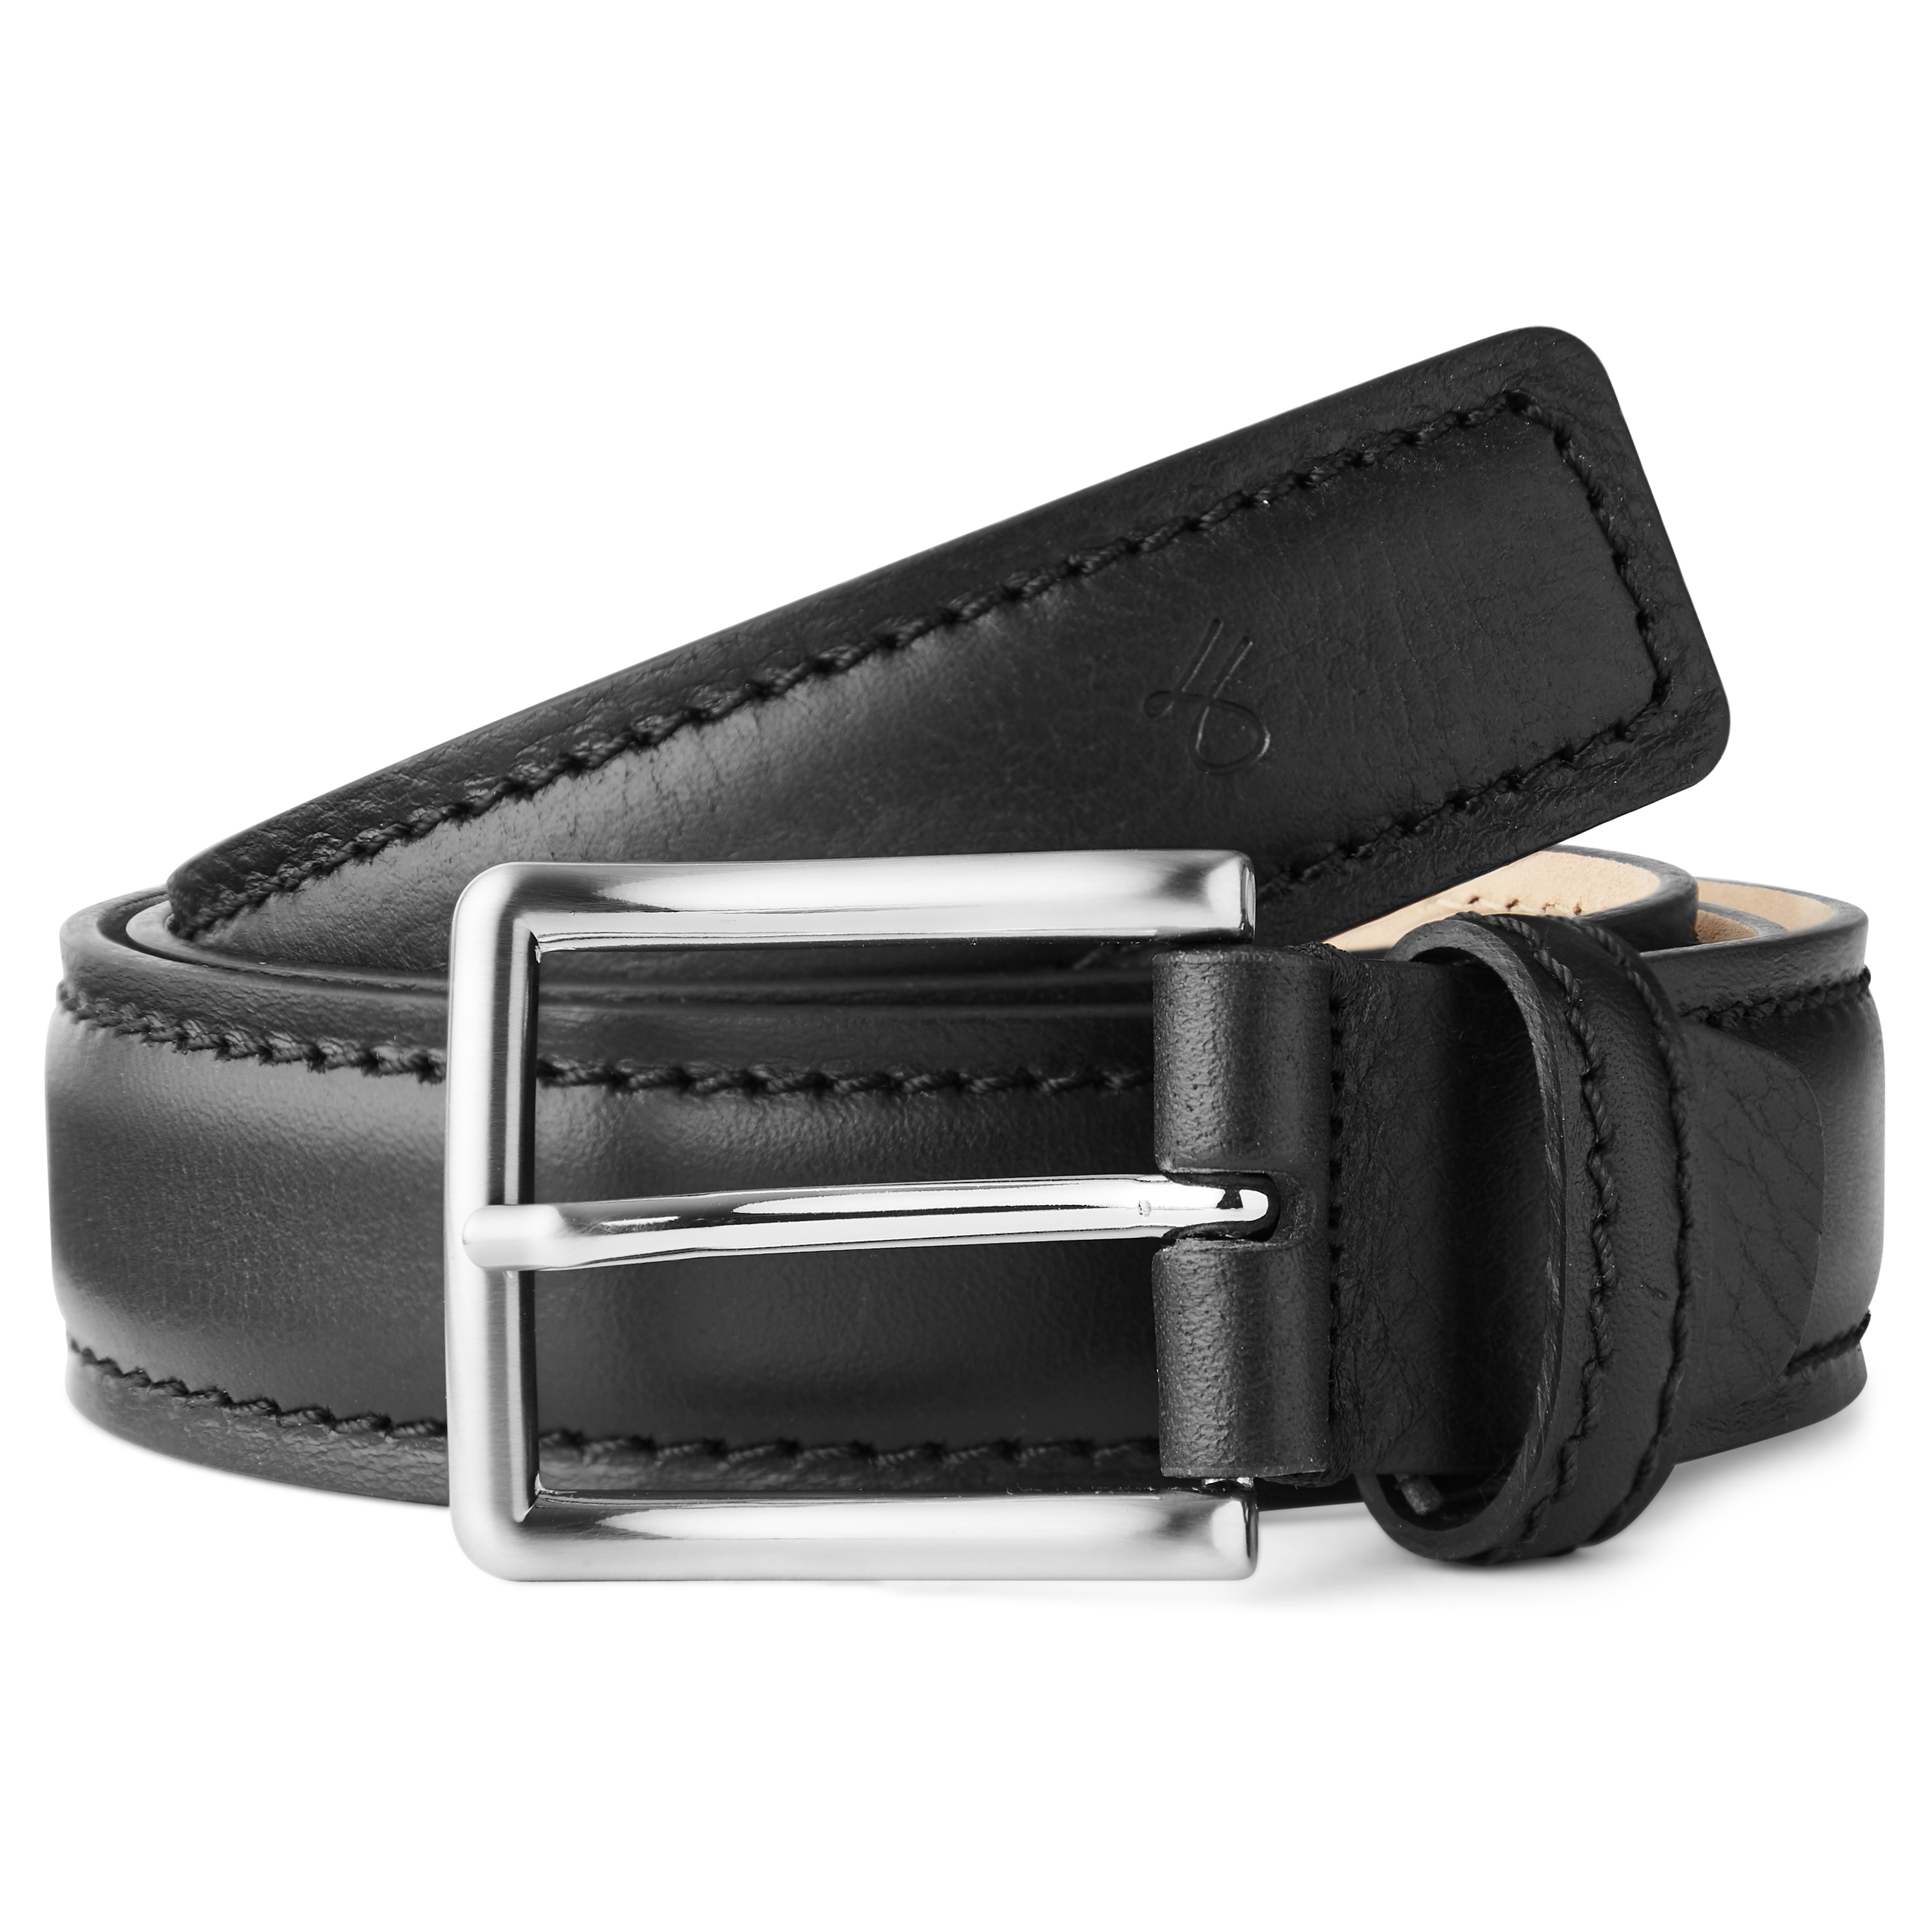 The Italian Leather Belt Collection